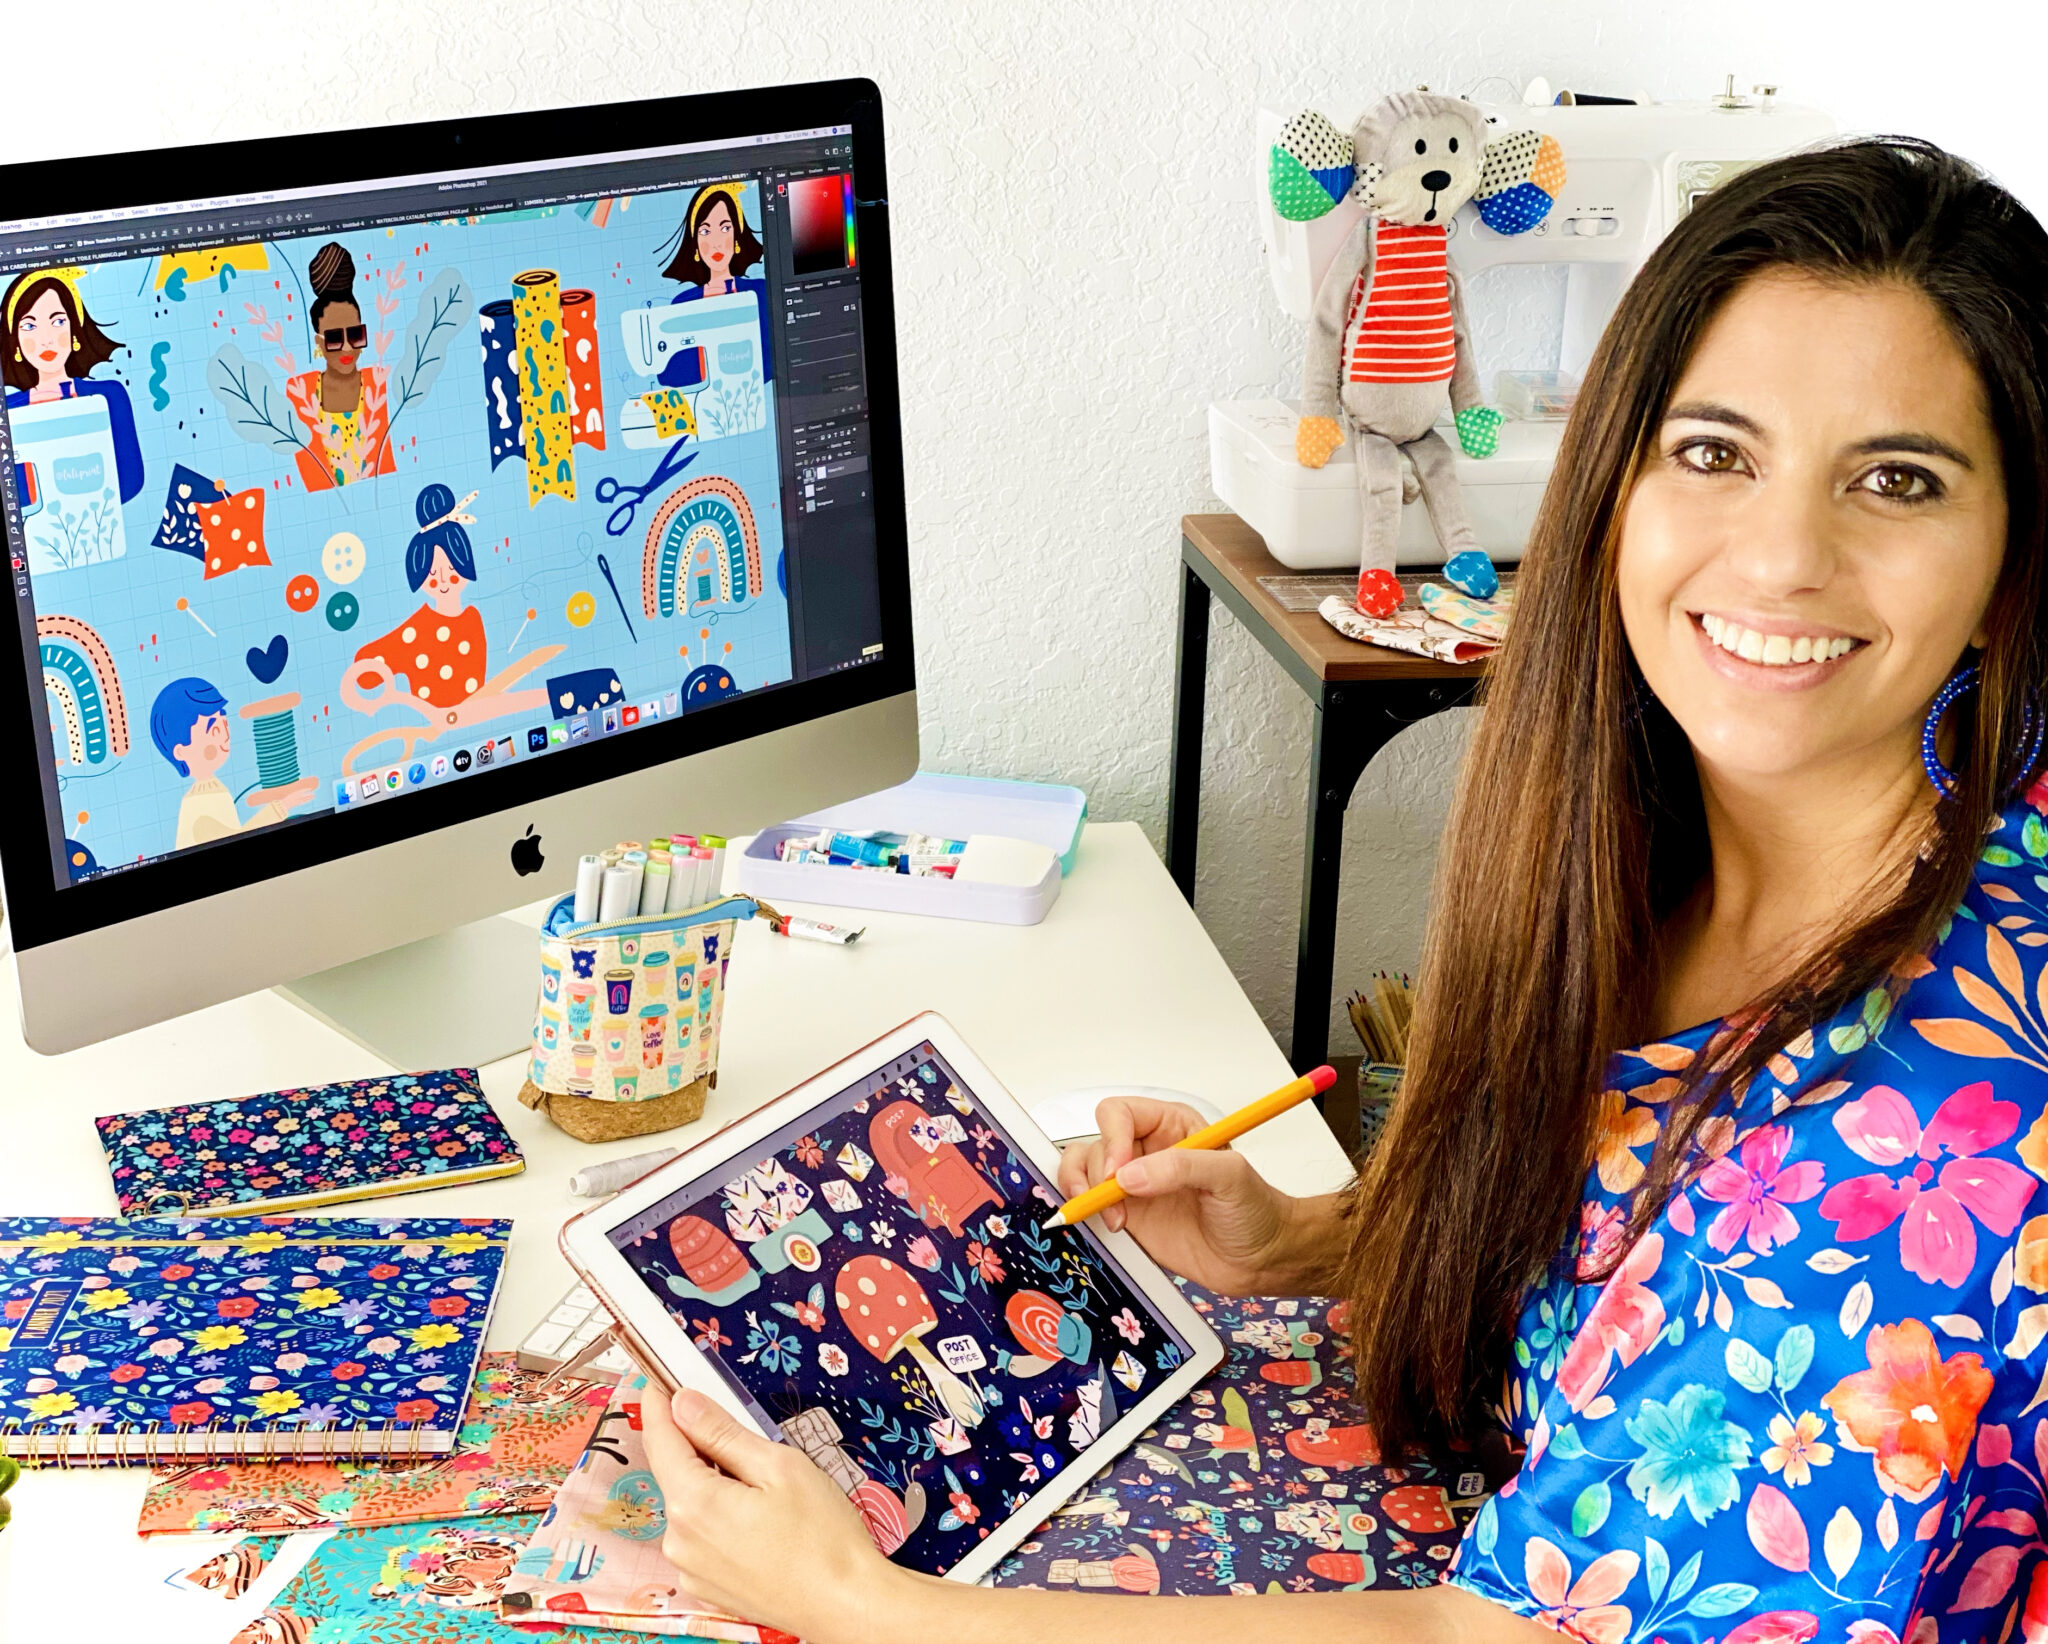 Luciana is sitting at a computer desk and turns toward the camera smiling. She is drawing on a tablet on the desk with a large monitor in front of her. The monitor, the tablet, notepads and stationery on the table are all bright, cheery florals, some with people making things or drawn with craft supplies and some with animals, like snails or tigers.